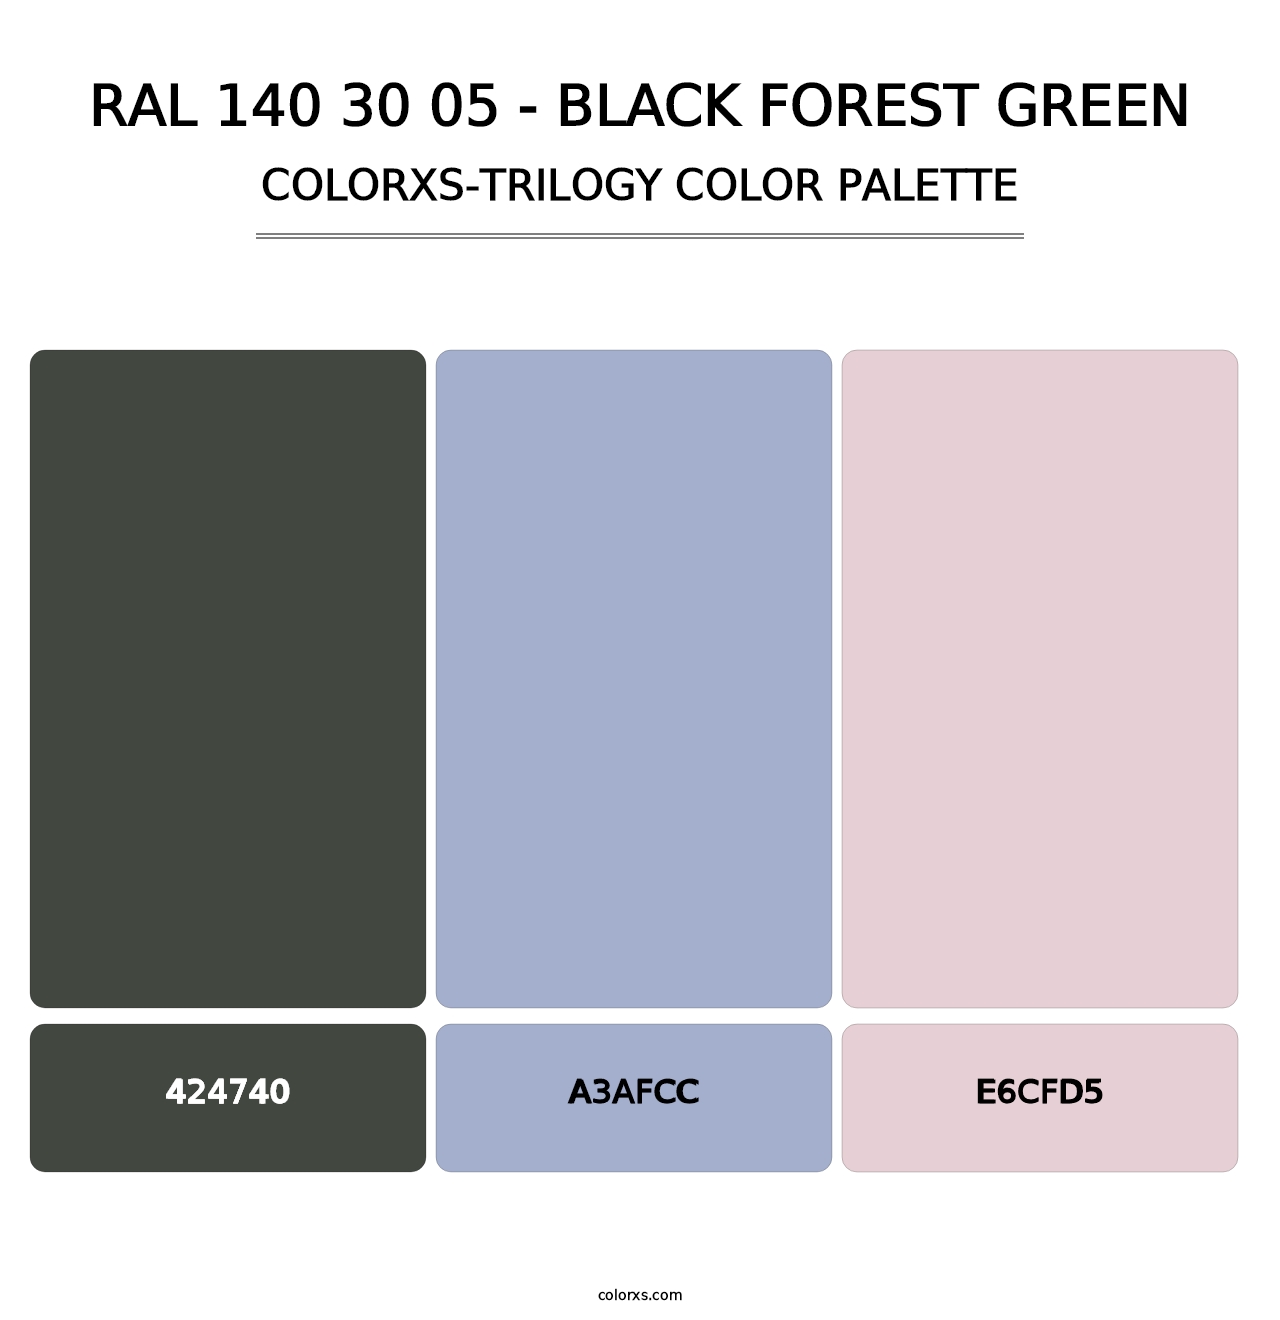 RAL 140 30 05 - Black Forest Green - Colorxs Trilogy Palette